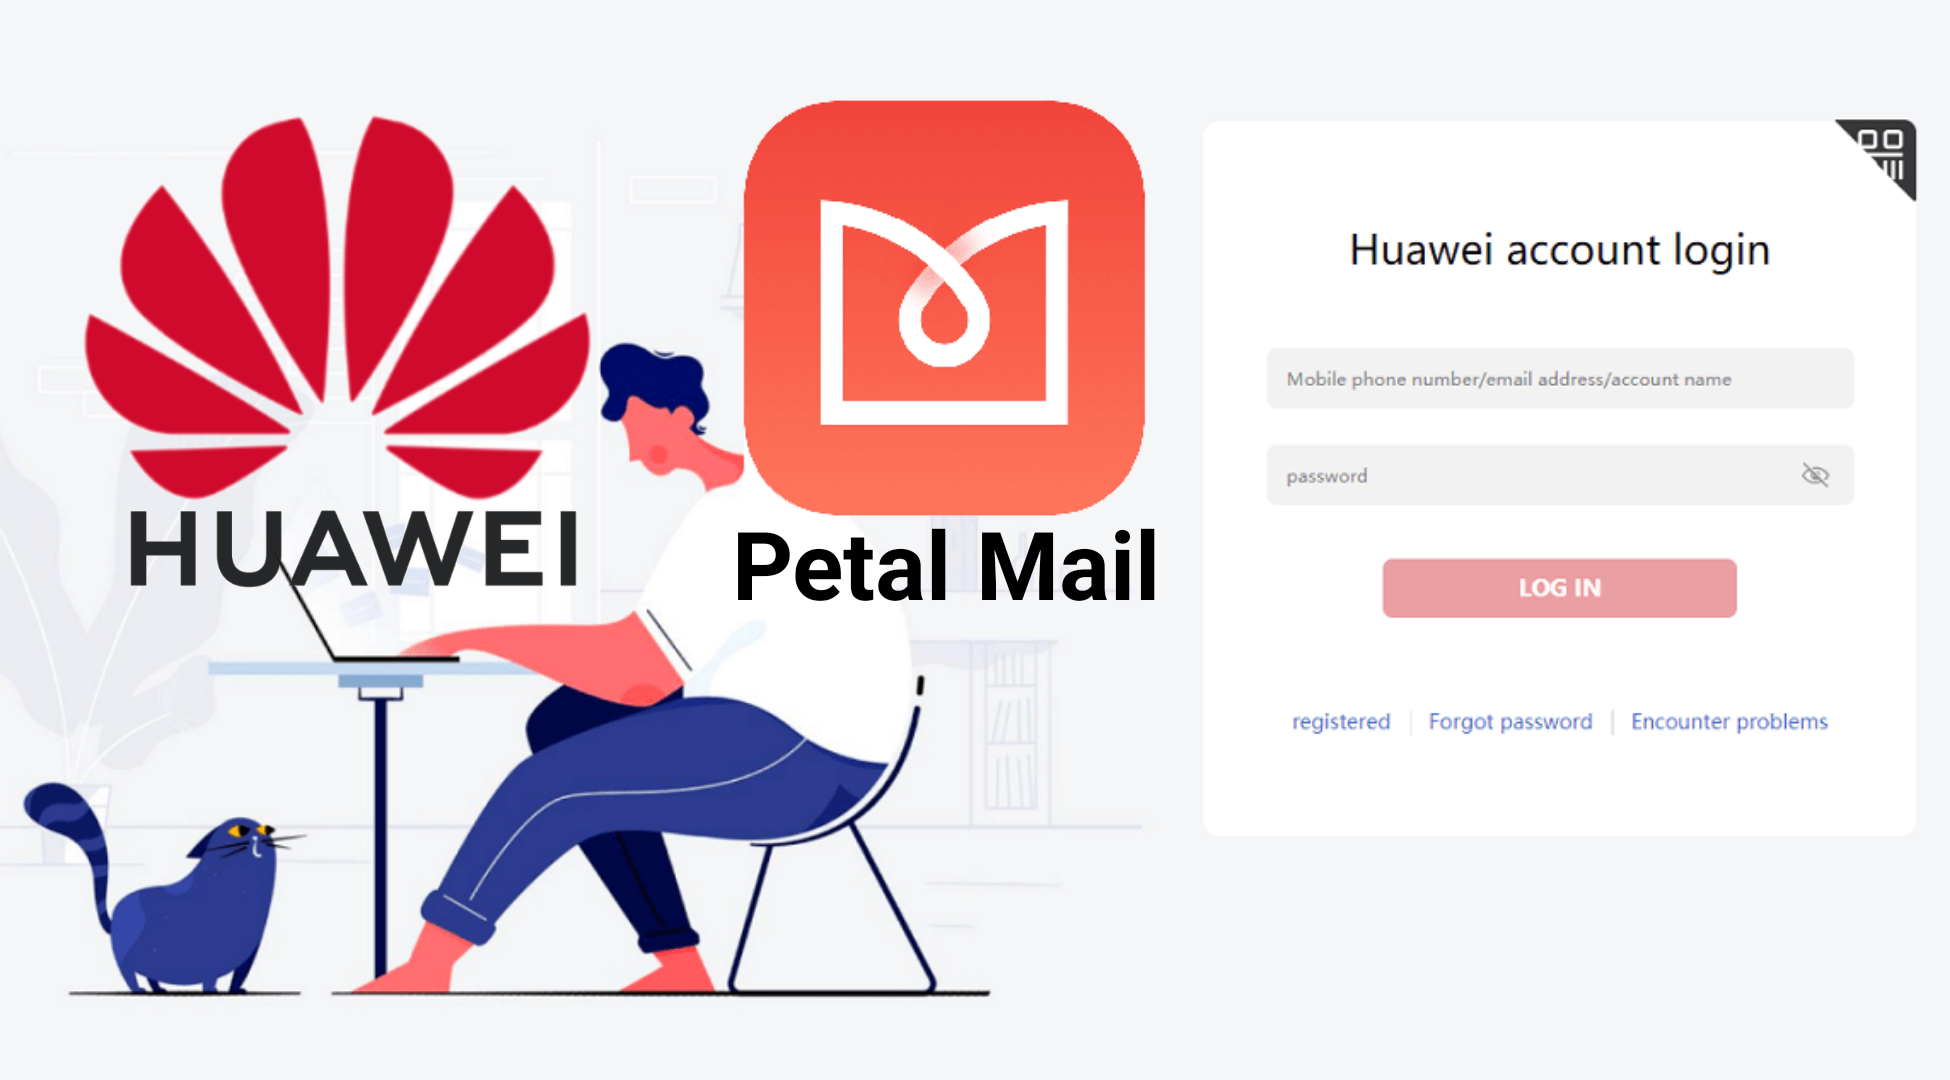 How to create an email on the Petal Mail service from Huawei - Steps to create a Petal Mail